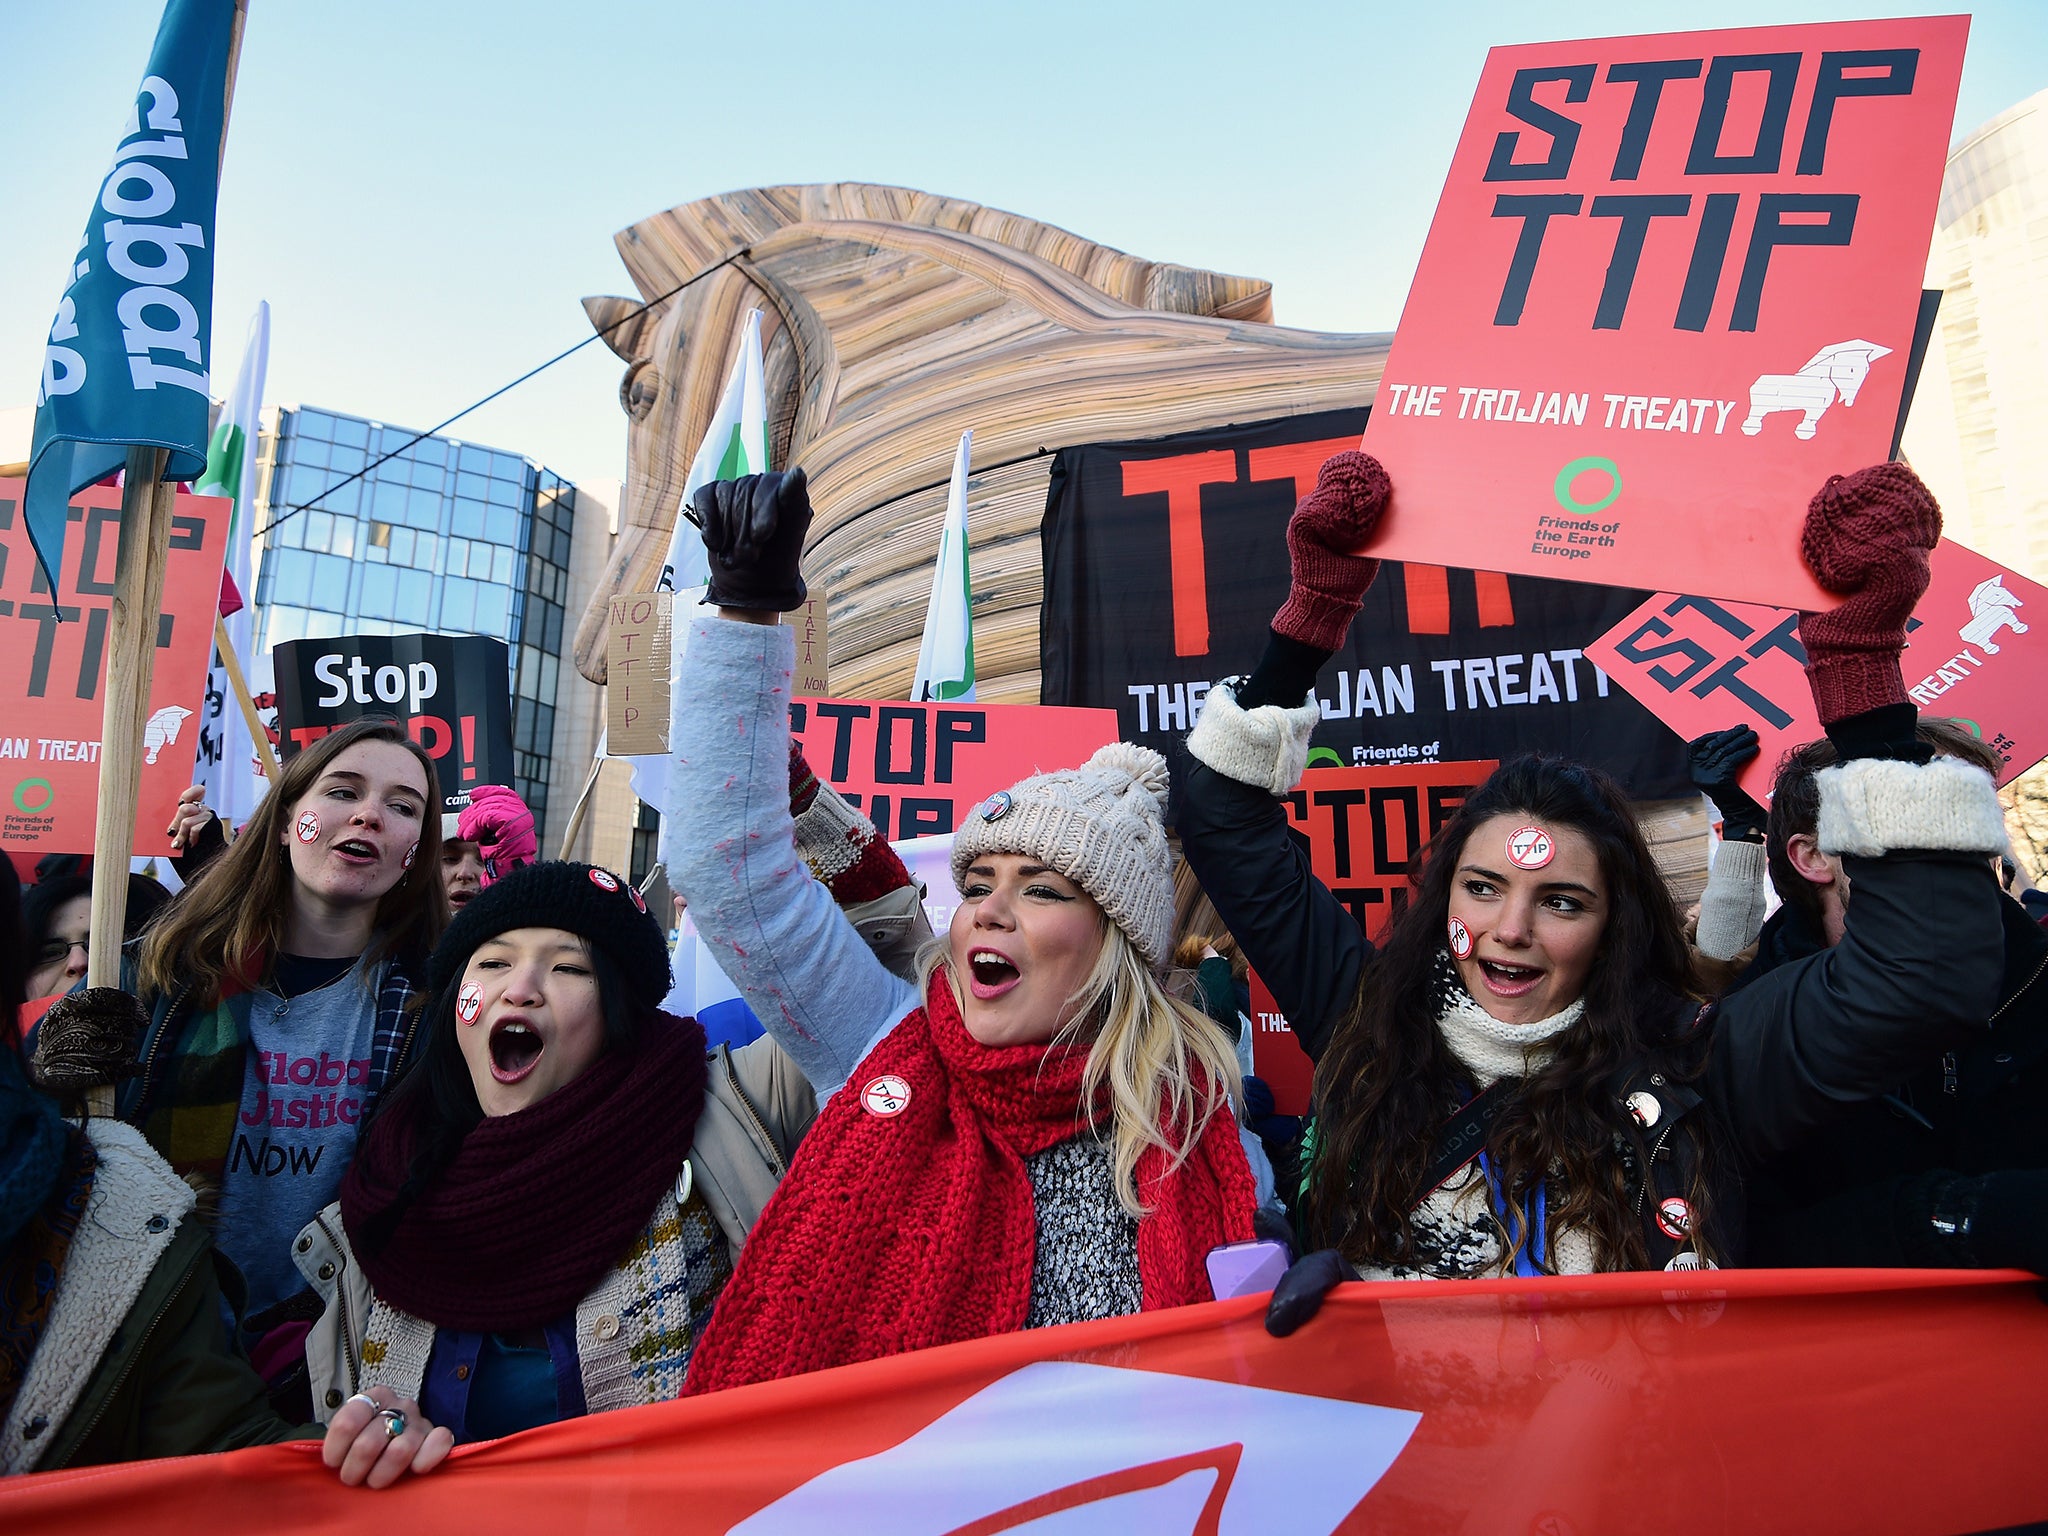 Demonstrators staging a protest against the Transatlantic Trade and Investment Pact (TTIP) in front of the the European institutions in Brussels in February